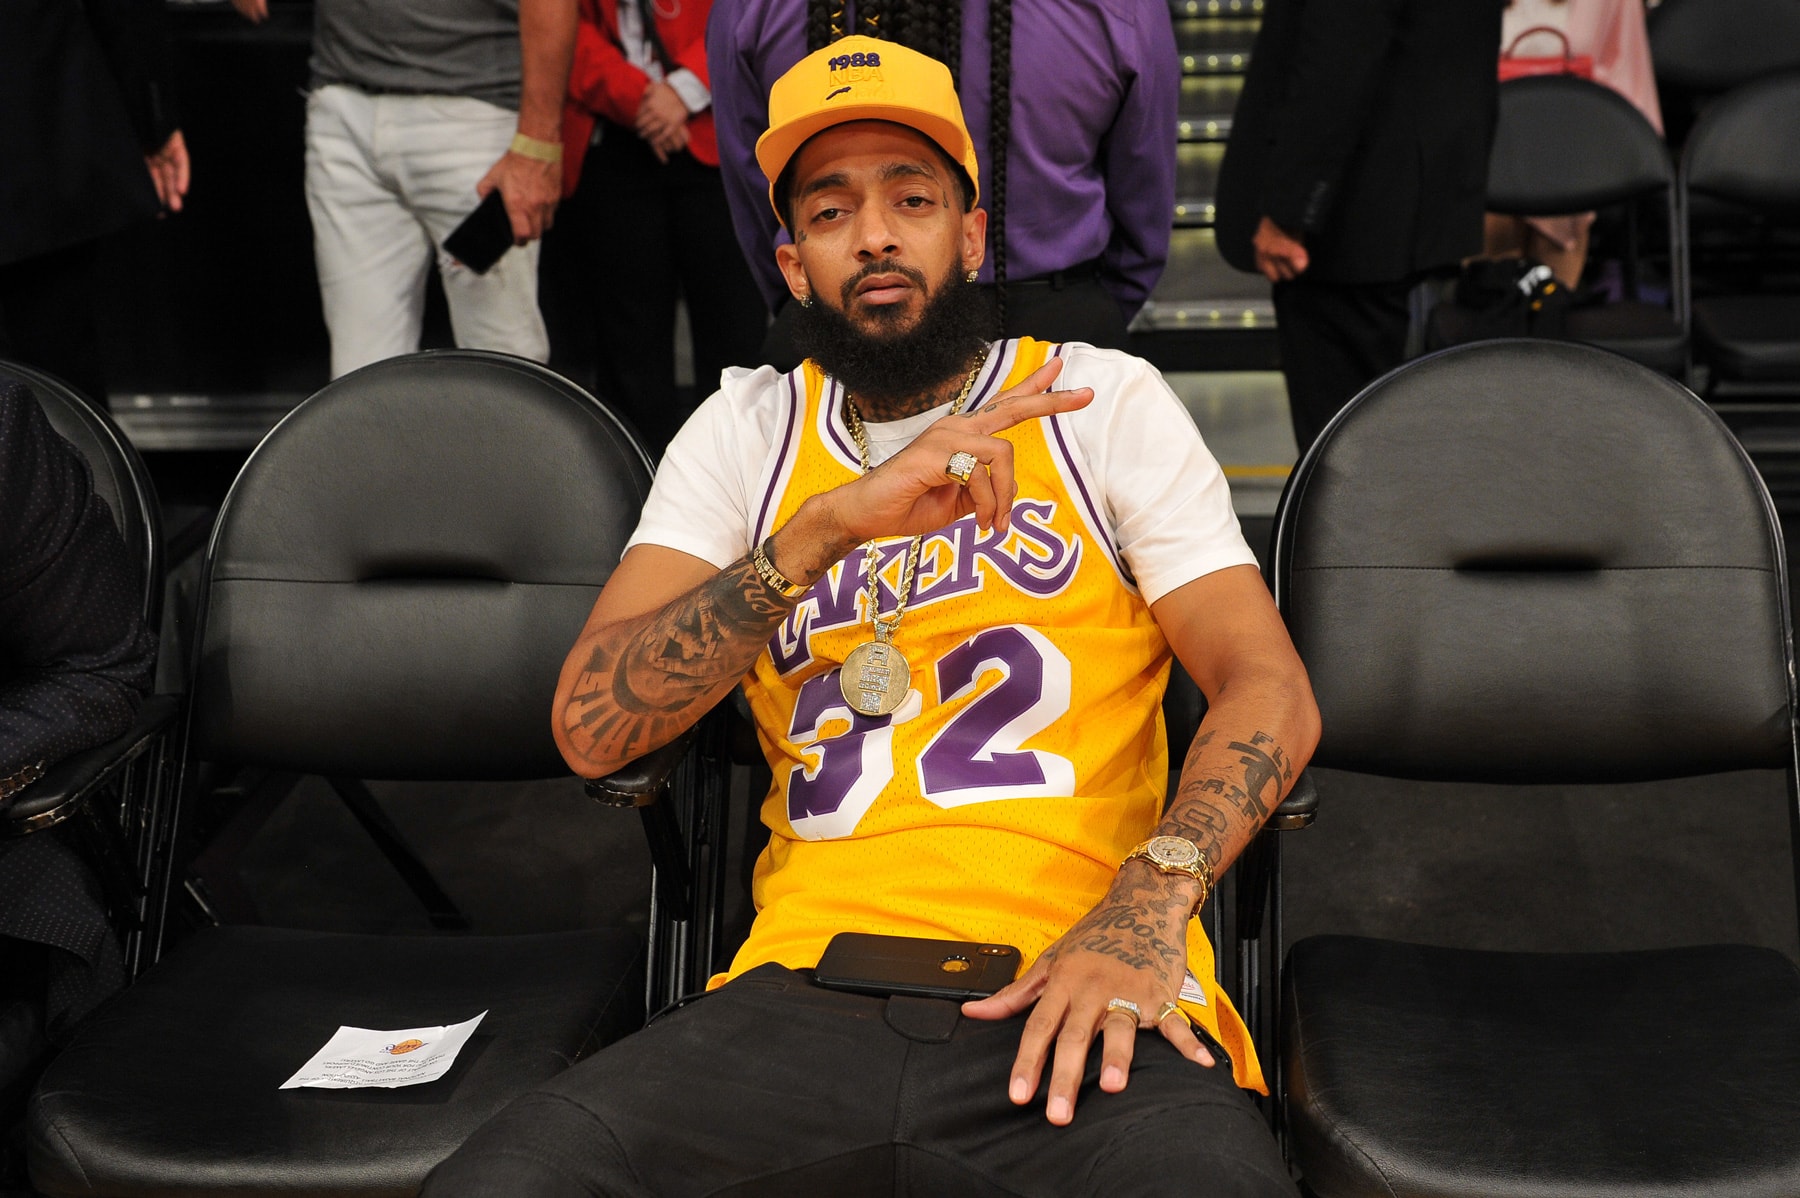 https://image-cdn.hypb.st/https%3A%2F%2Fhypebeast.com%2Fimage%2F2019%2F04%2Fnipsey-hussle-tribute-lakers-warriors-game-1.jpg?cbr=1&q=90